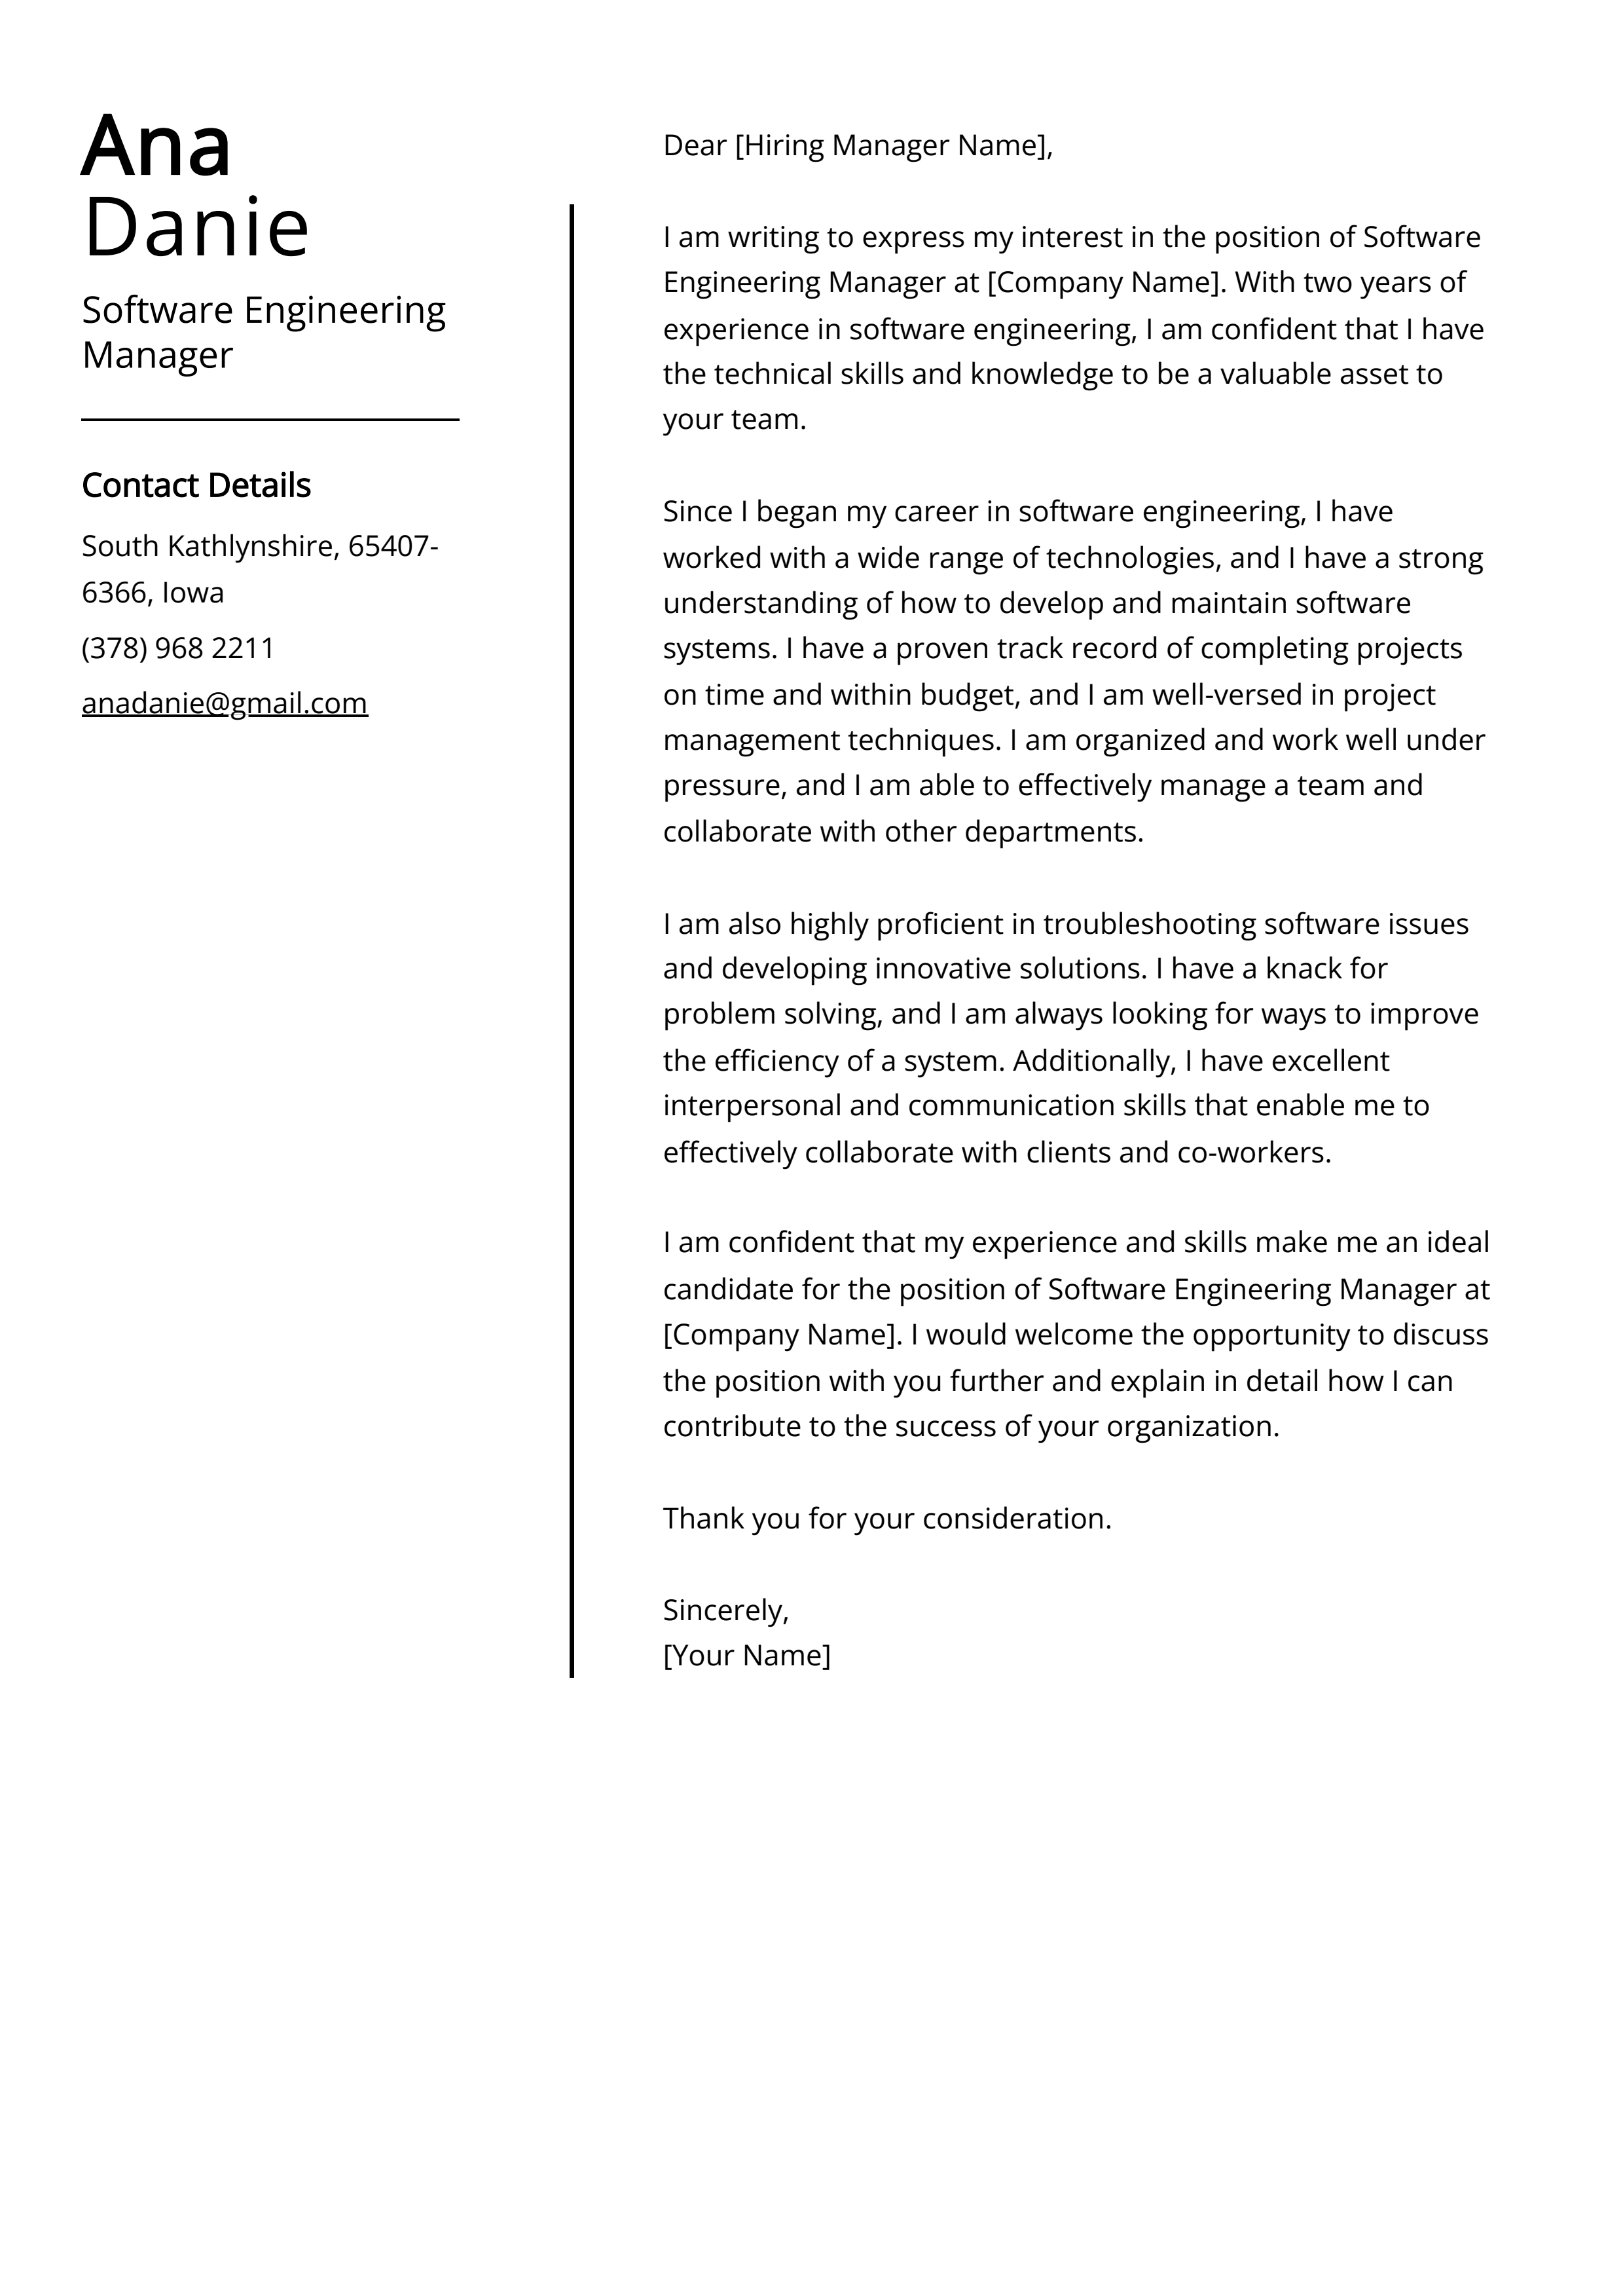 Software Engineering Manager Cover Letter Example